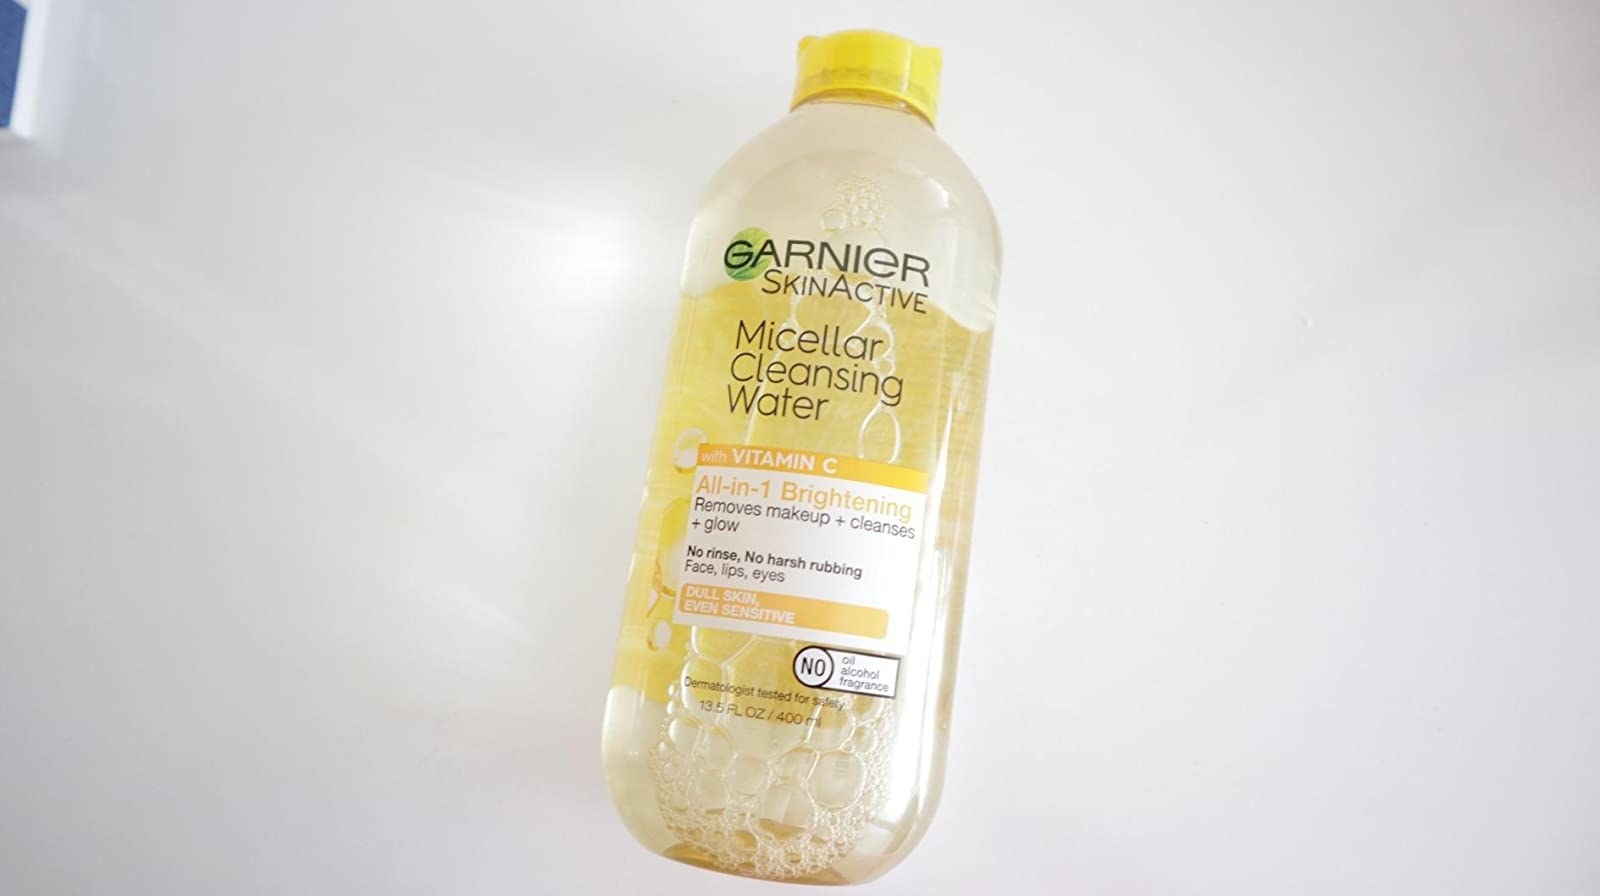 Reviewer photo of the yellow bottle of micellar water